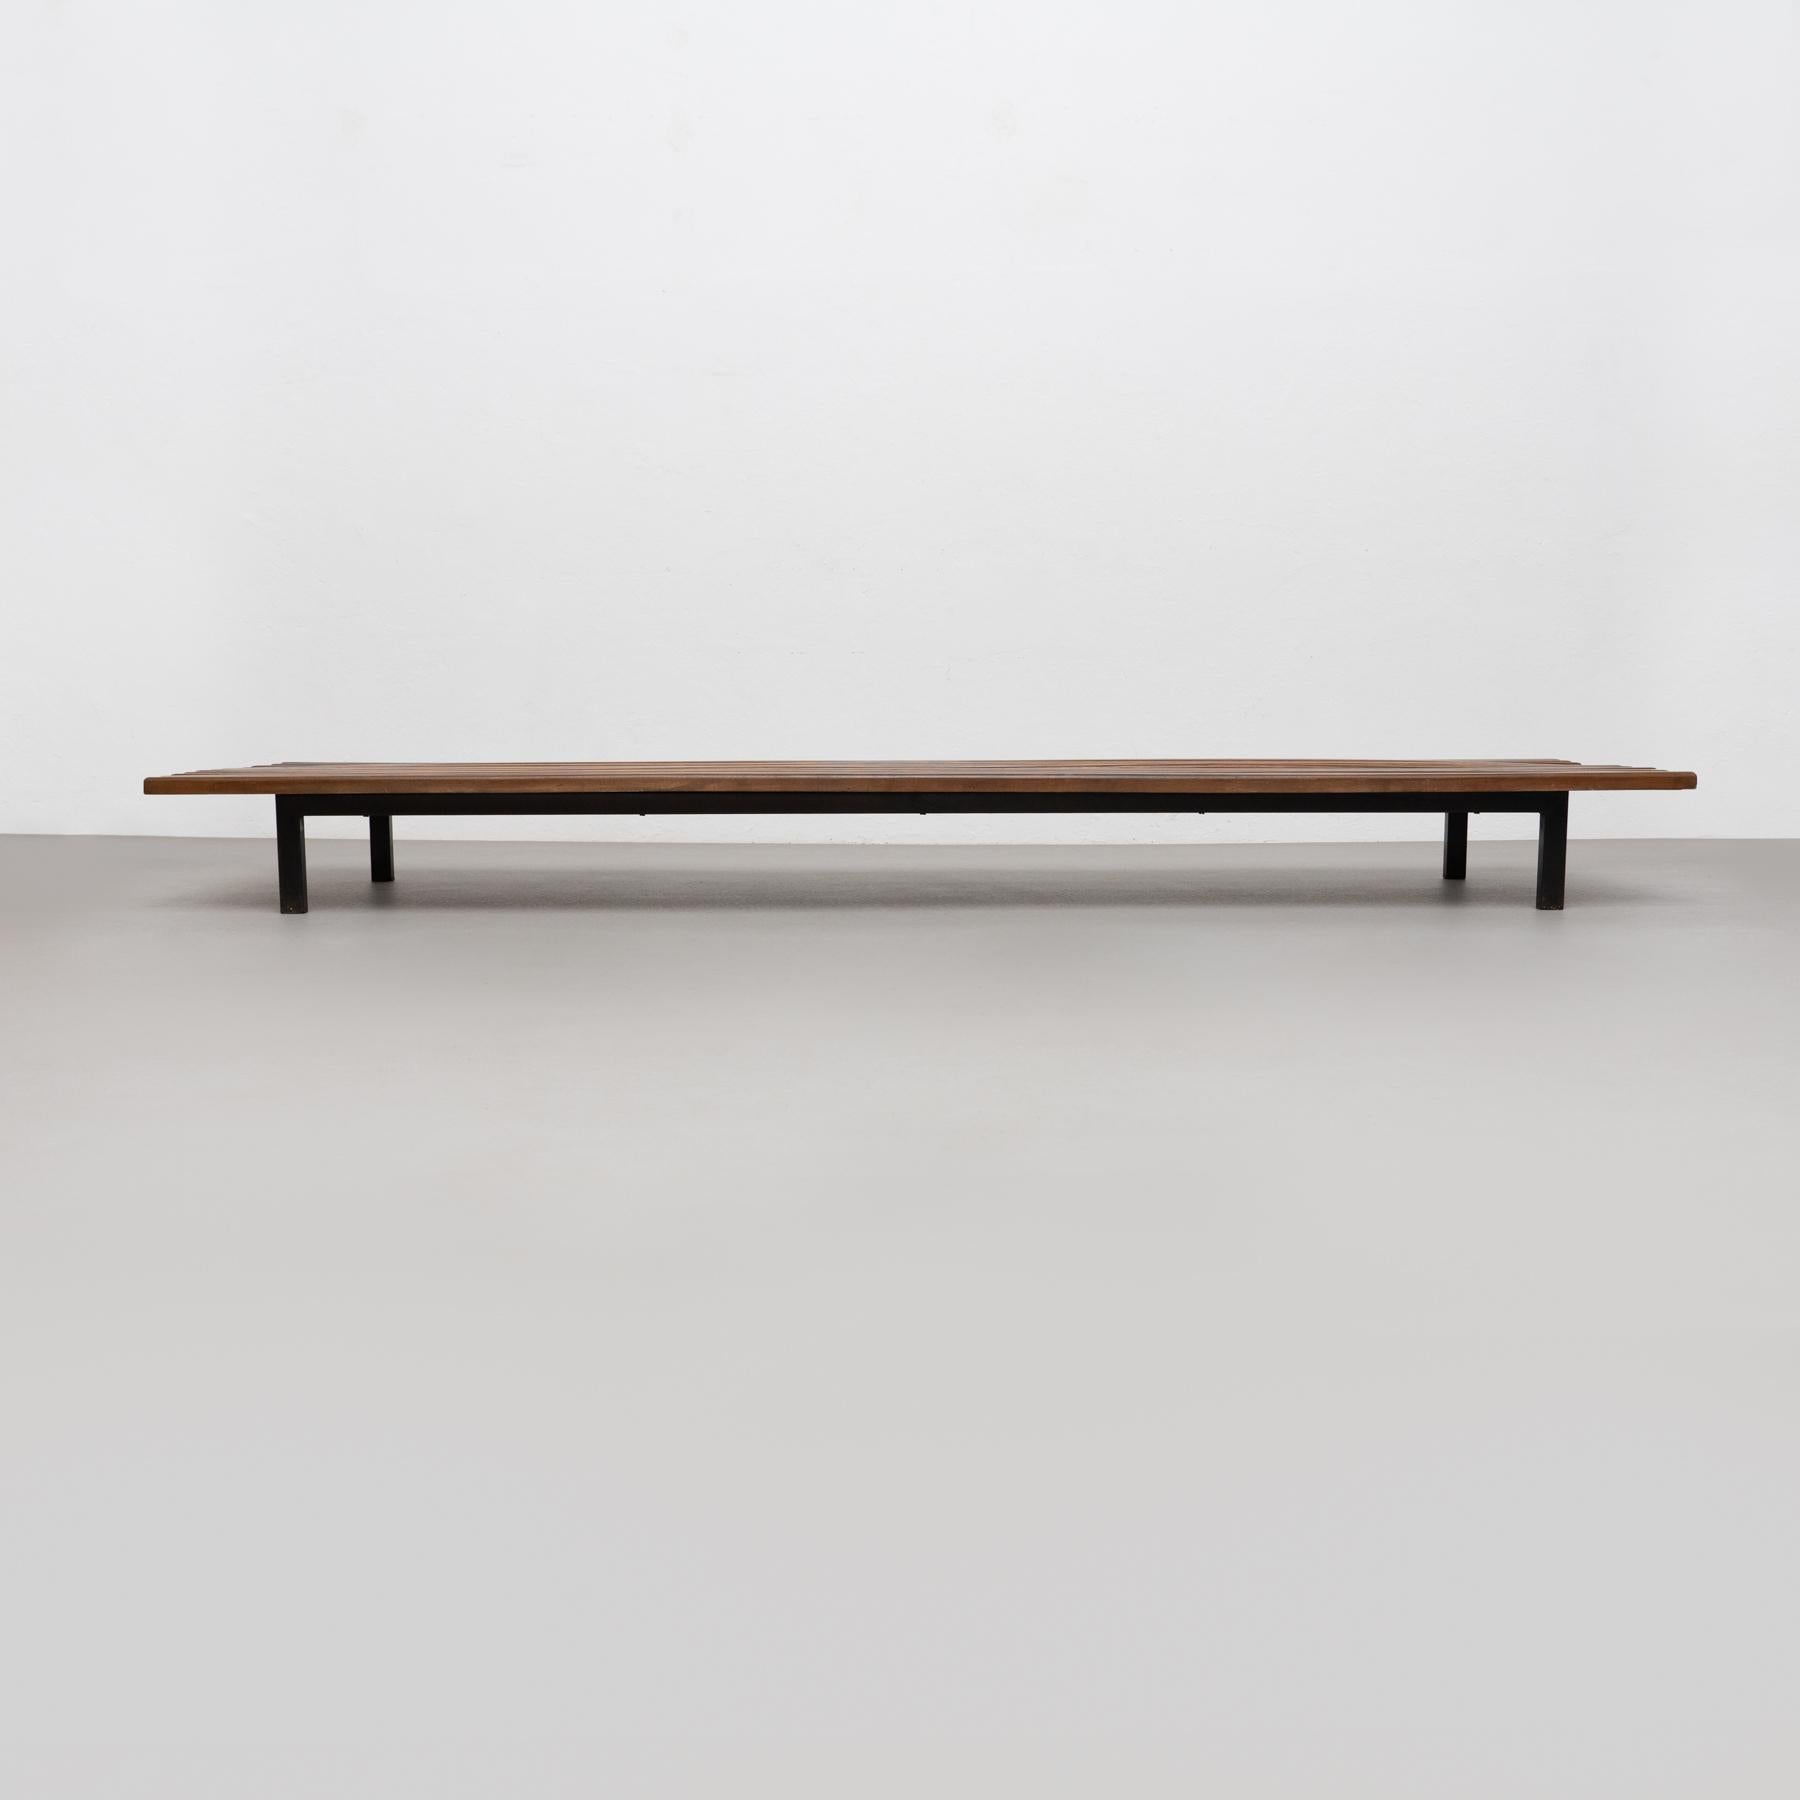 Bench designed by Charlotte Perriand, circa 1950.
Manufactured by Steph Simon (France), circa 1950.
Wood, lacquered metal frame and legs.

Provenance: Cansado, Mauritania (Africa).

In original condition, with minor wear consistent with age